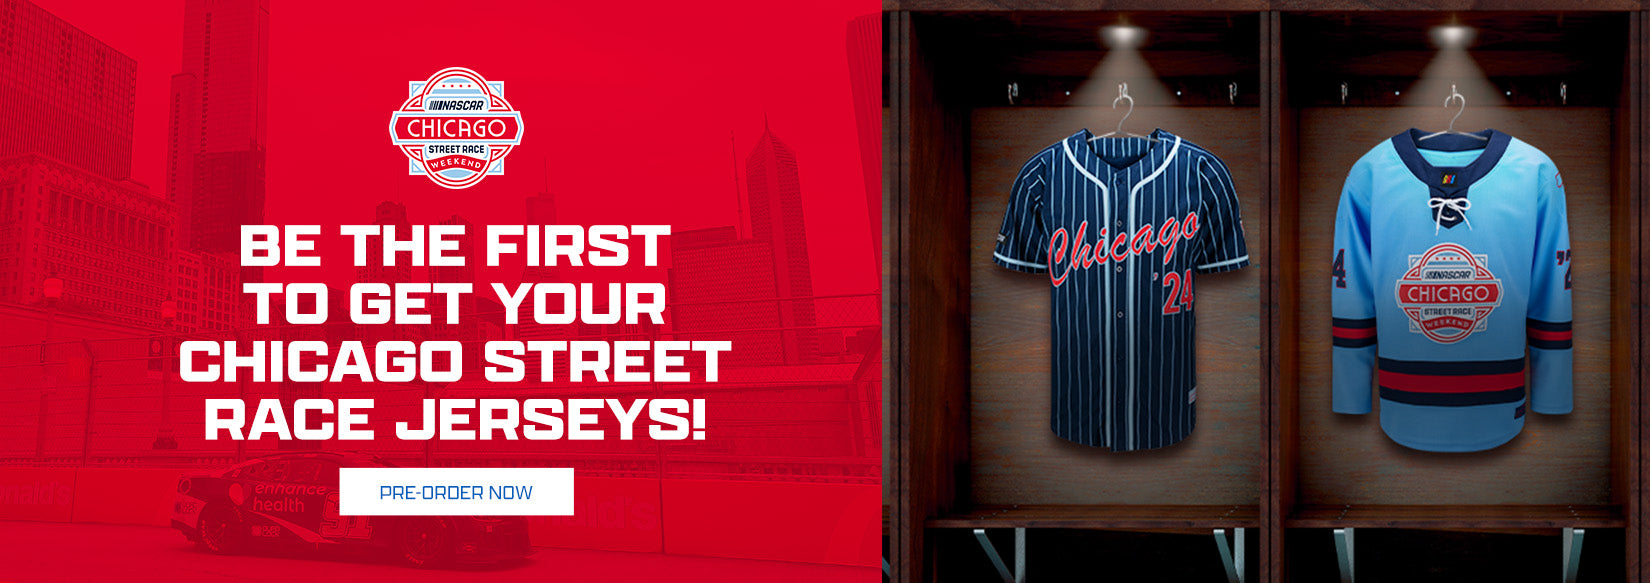 Be the First to Get Your Chicago Street Race Jerseys! - PRE-ORDER NOW